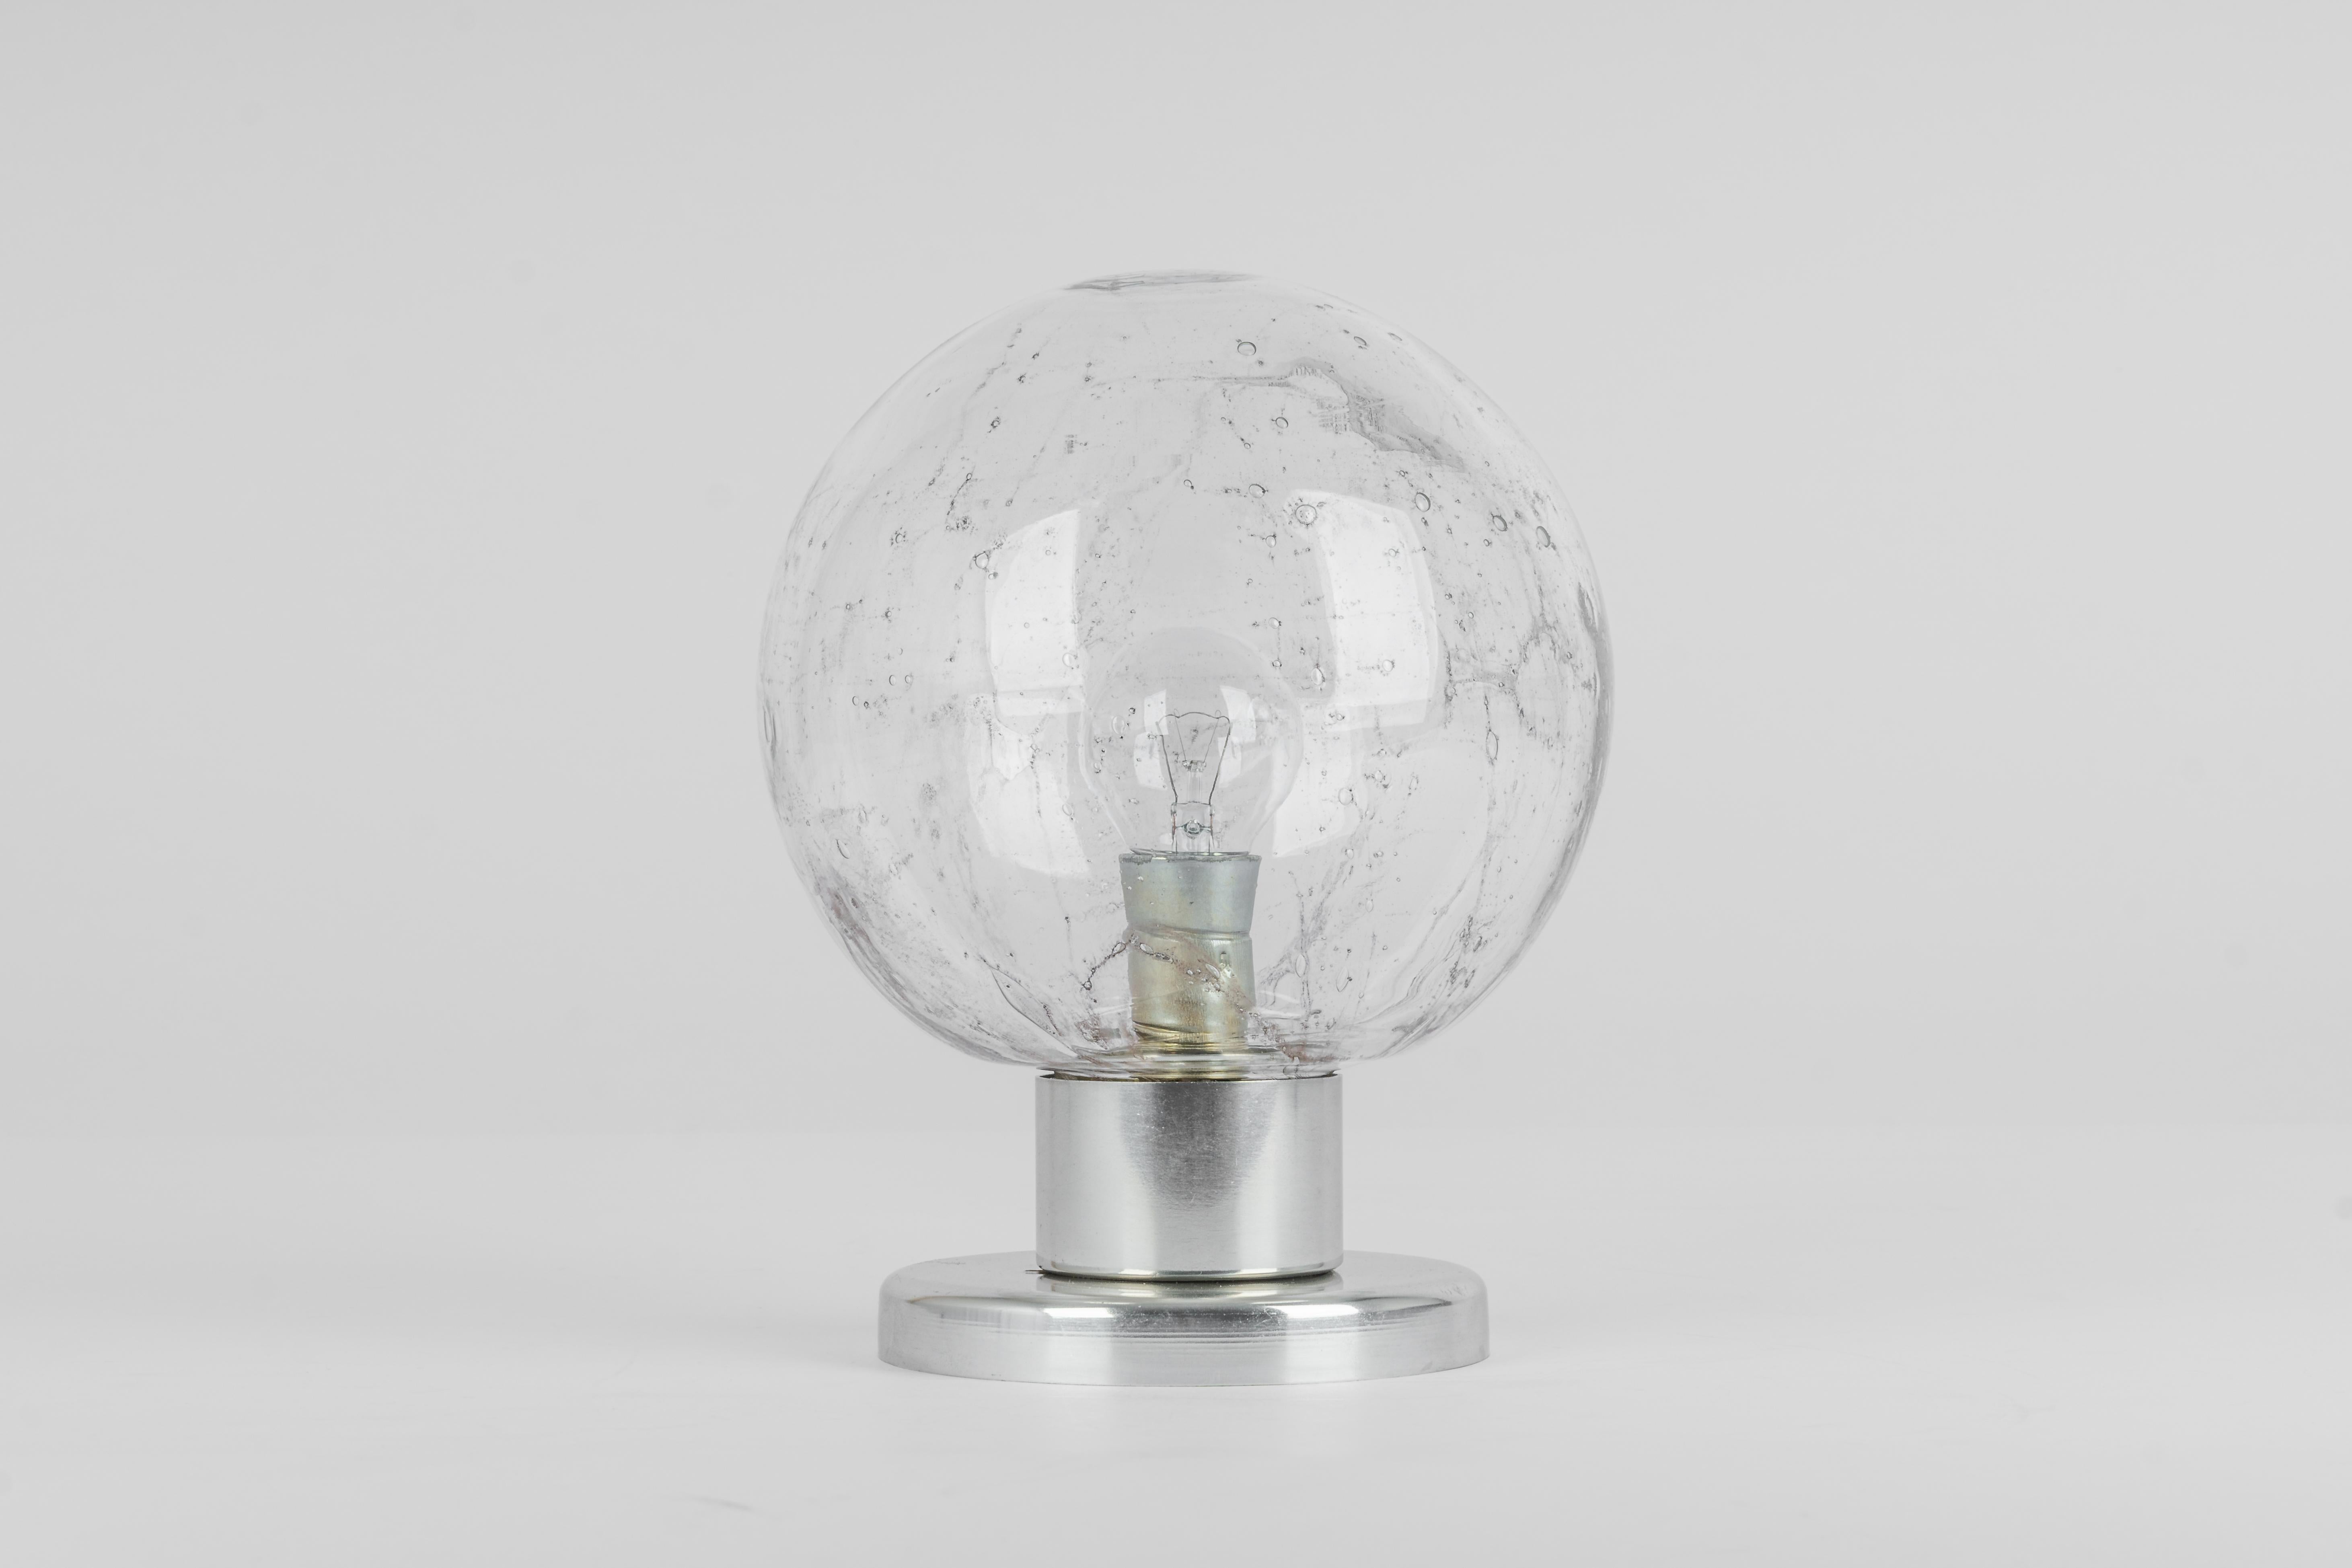 1 of 5 petite midcentury flush mount / or wall light made by Doria Leuchtern, manufactured in Germany, circa 1970-1979.
The flush mount is composed of 1 Murano glass ball attached to a frame.

Sockets: 1x E14 small bulbs.
 Light bulbs are not